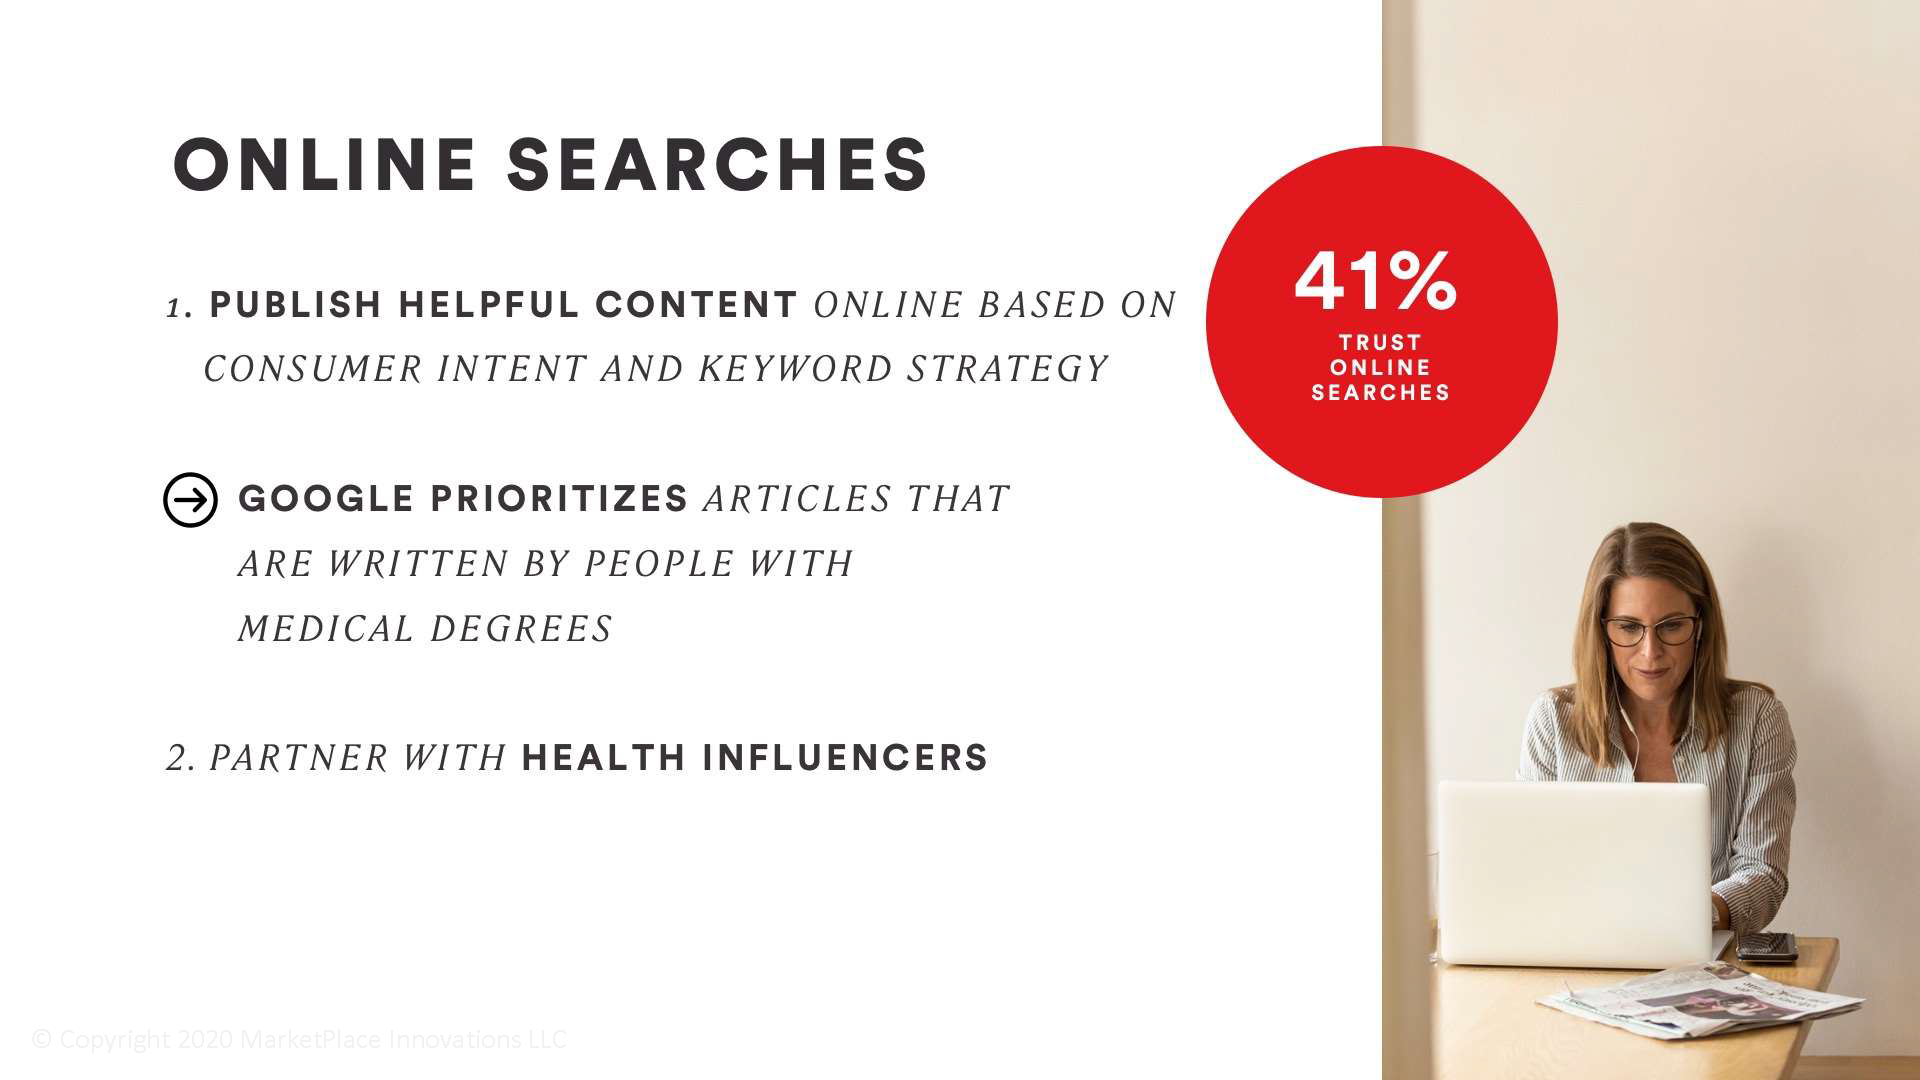 online searches - trends in health and wellness